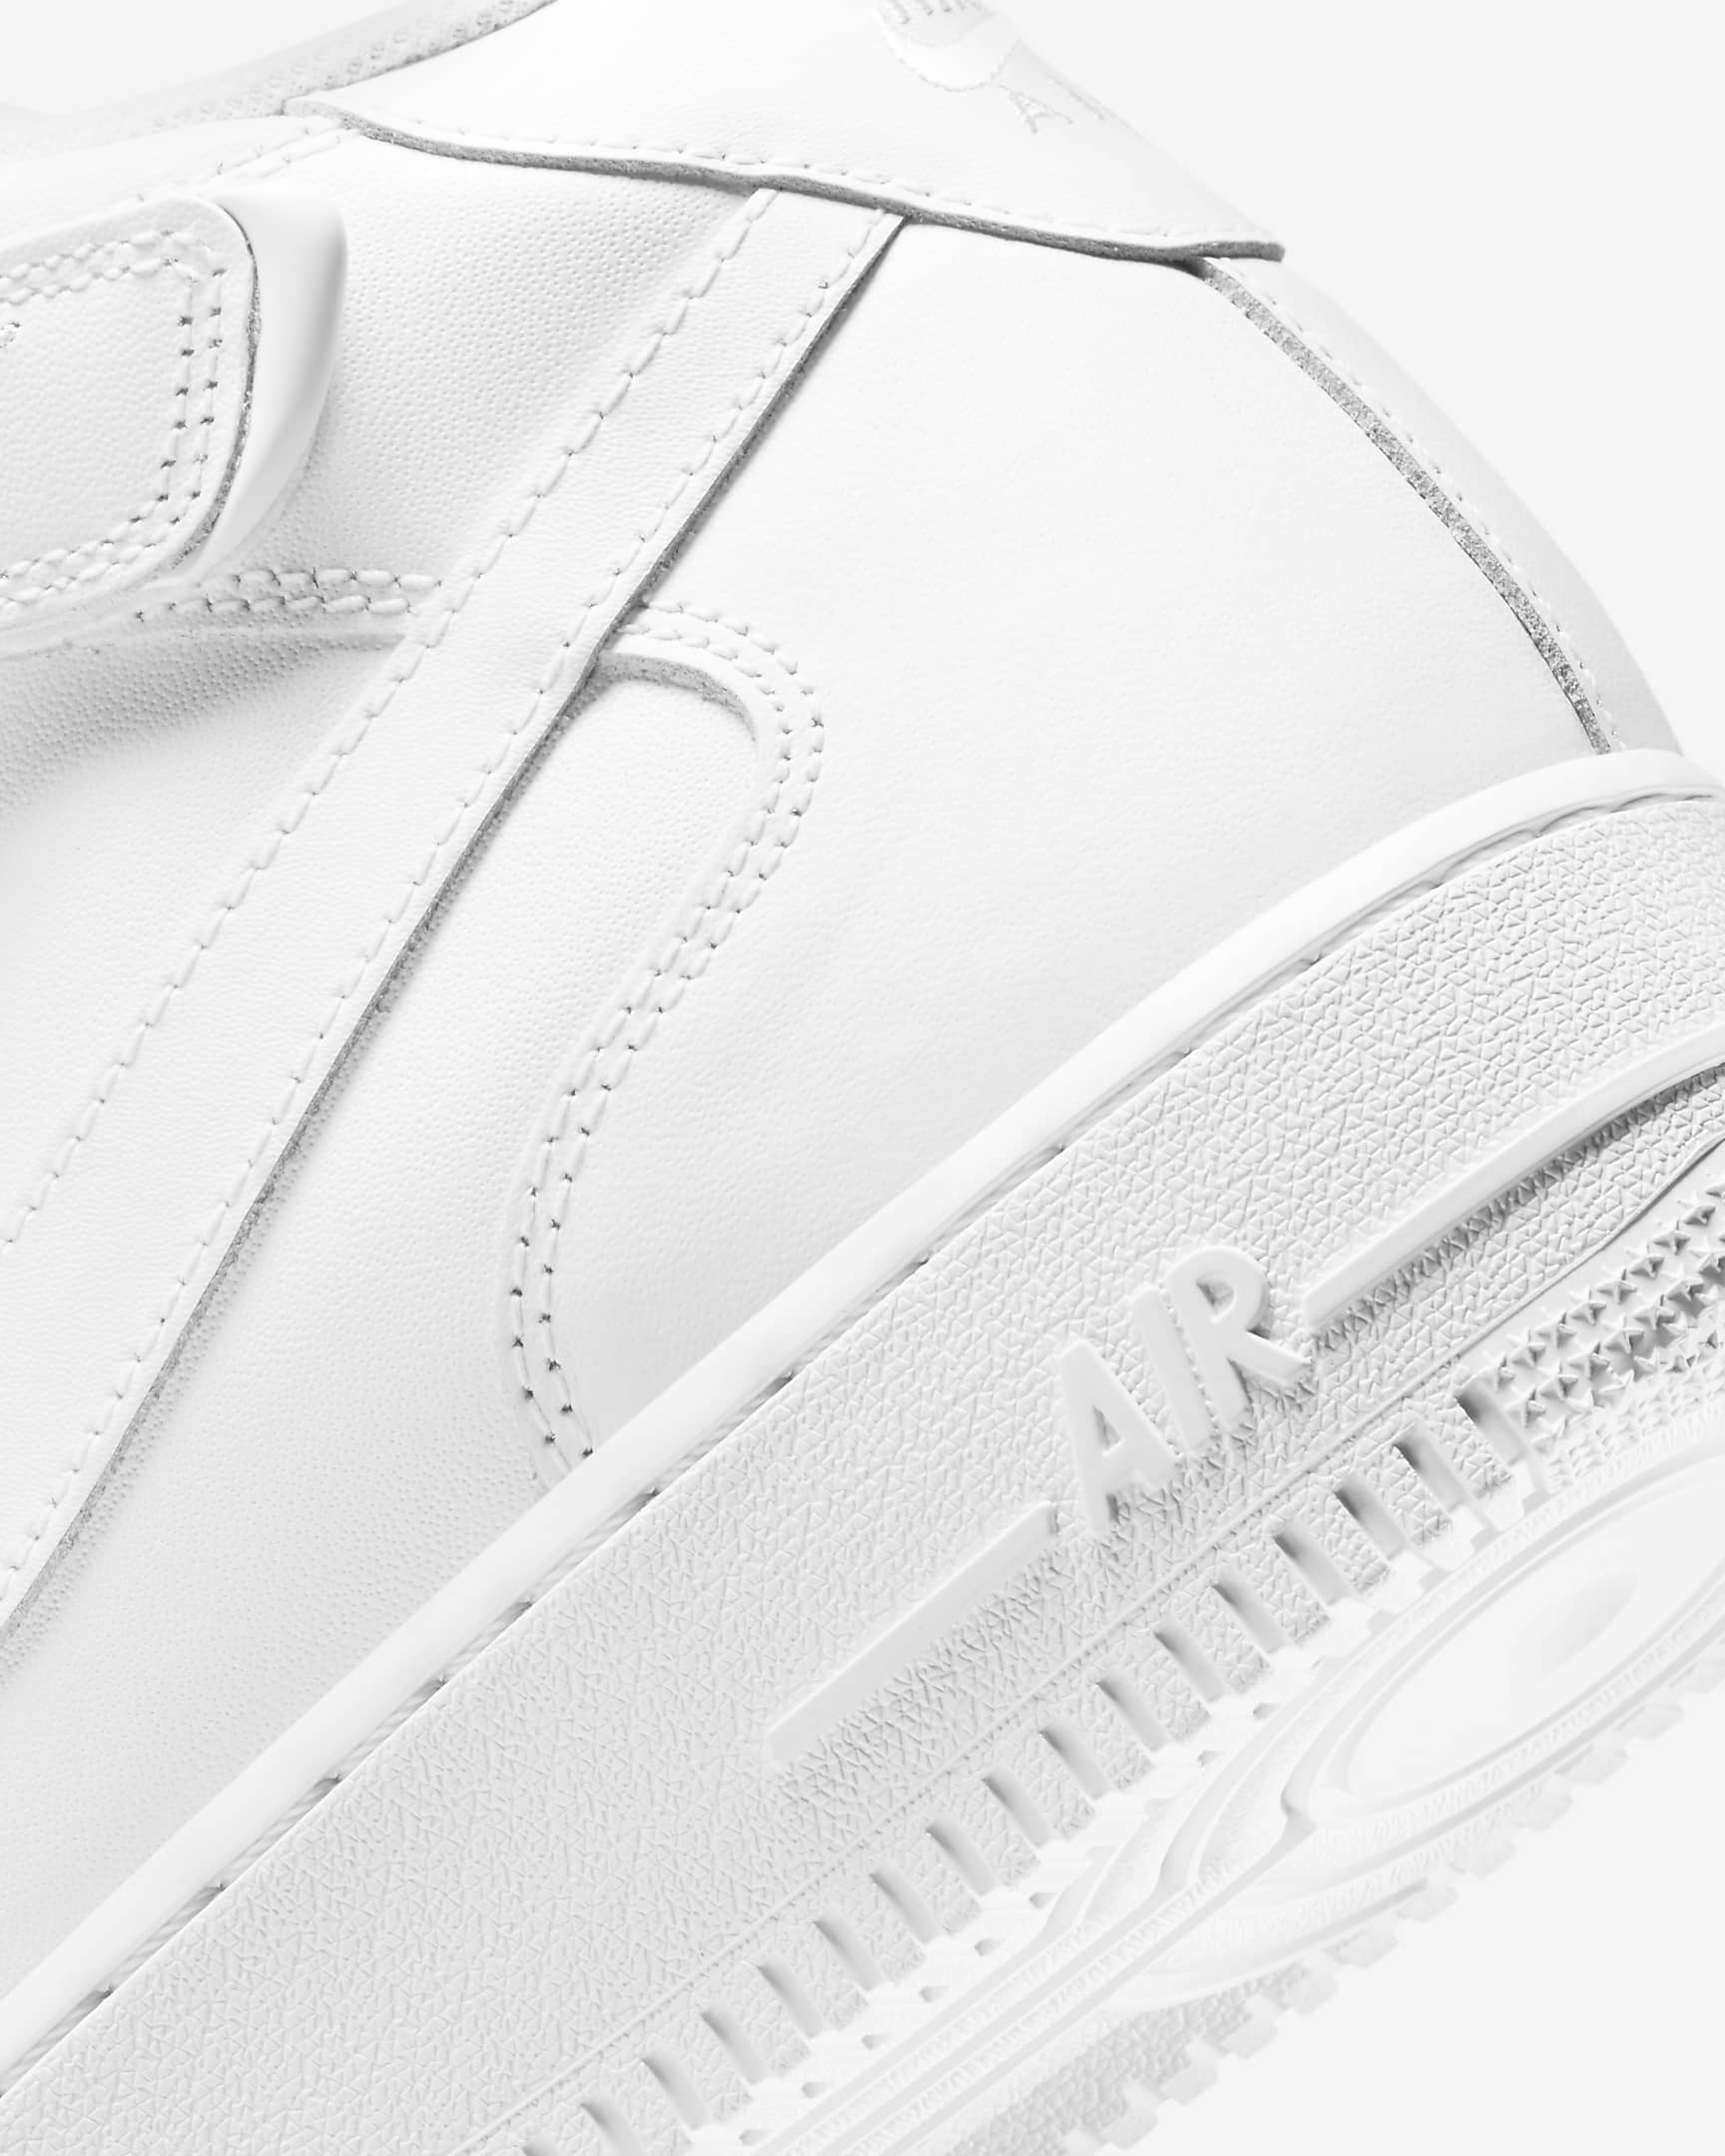 Chaussure Nike Air Force 1 Mid '07 pour Homme - Blanc/Blanc